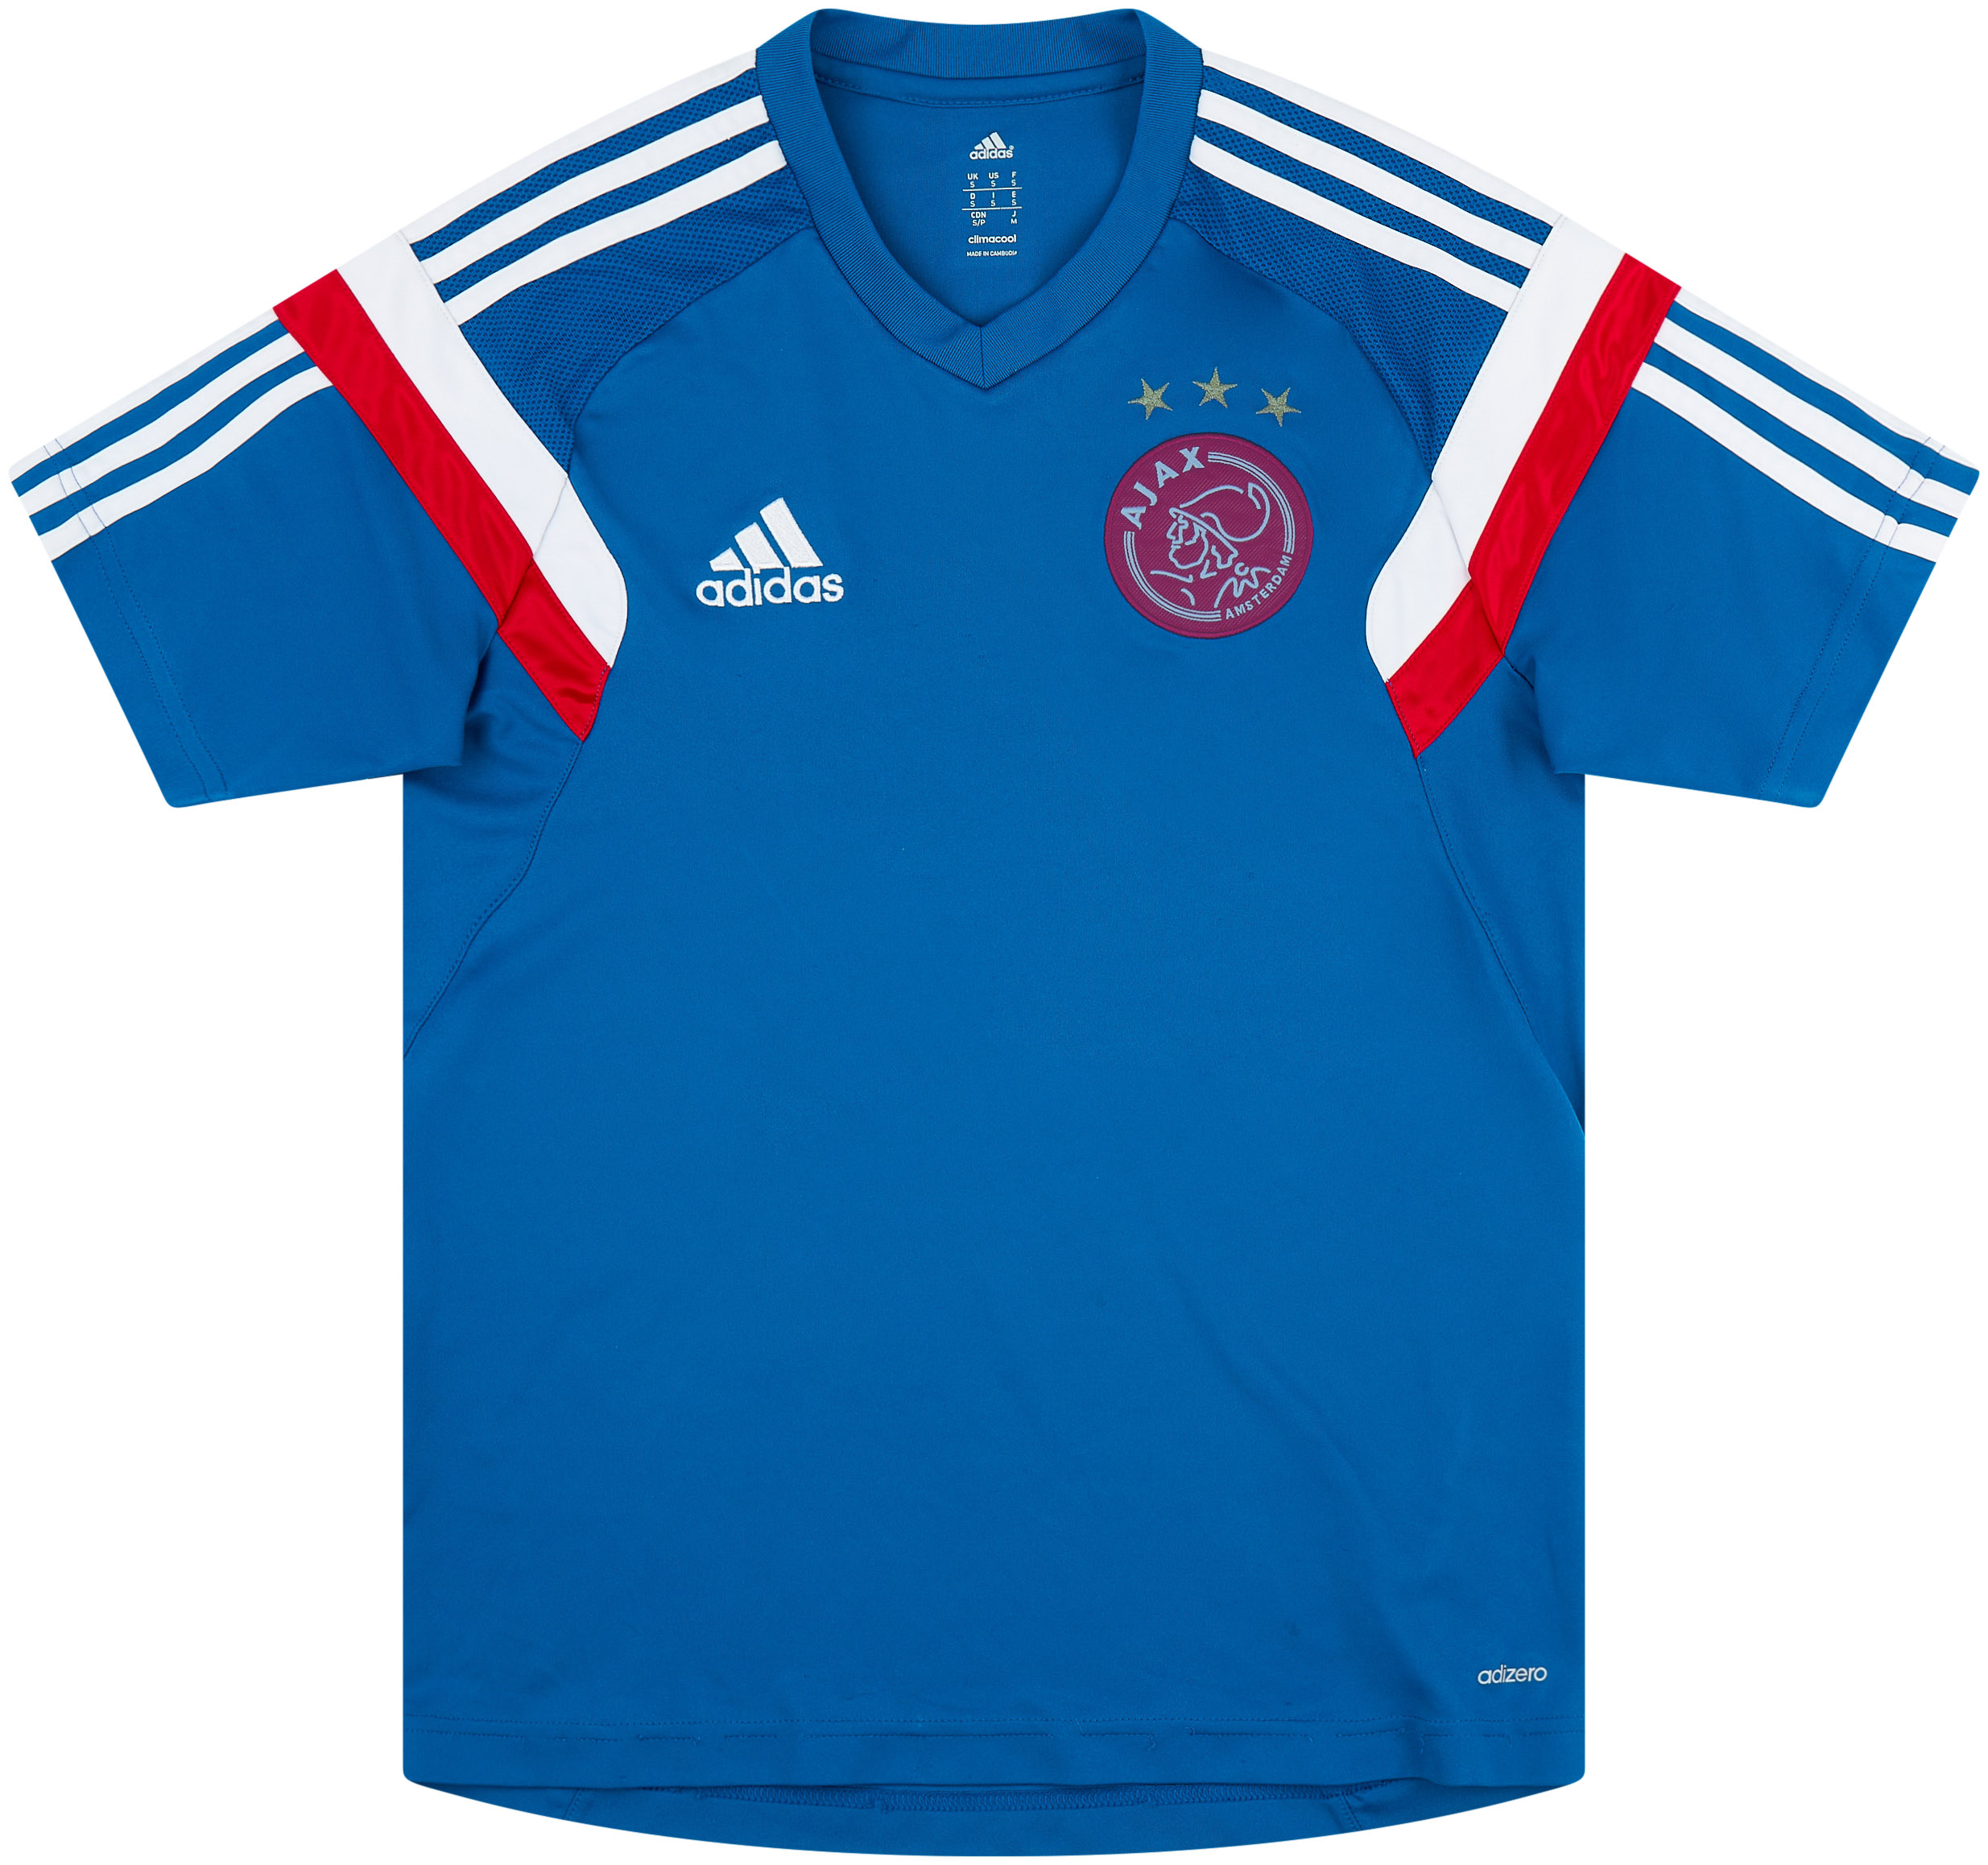 Betsy Trotwood Verhandeling abces 2014-15 Ajax adidas Training Shirt - Very Good 6/10 - (S)